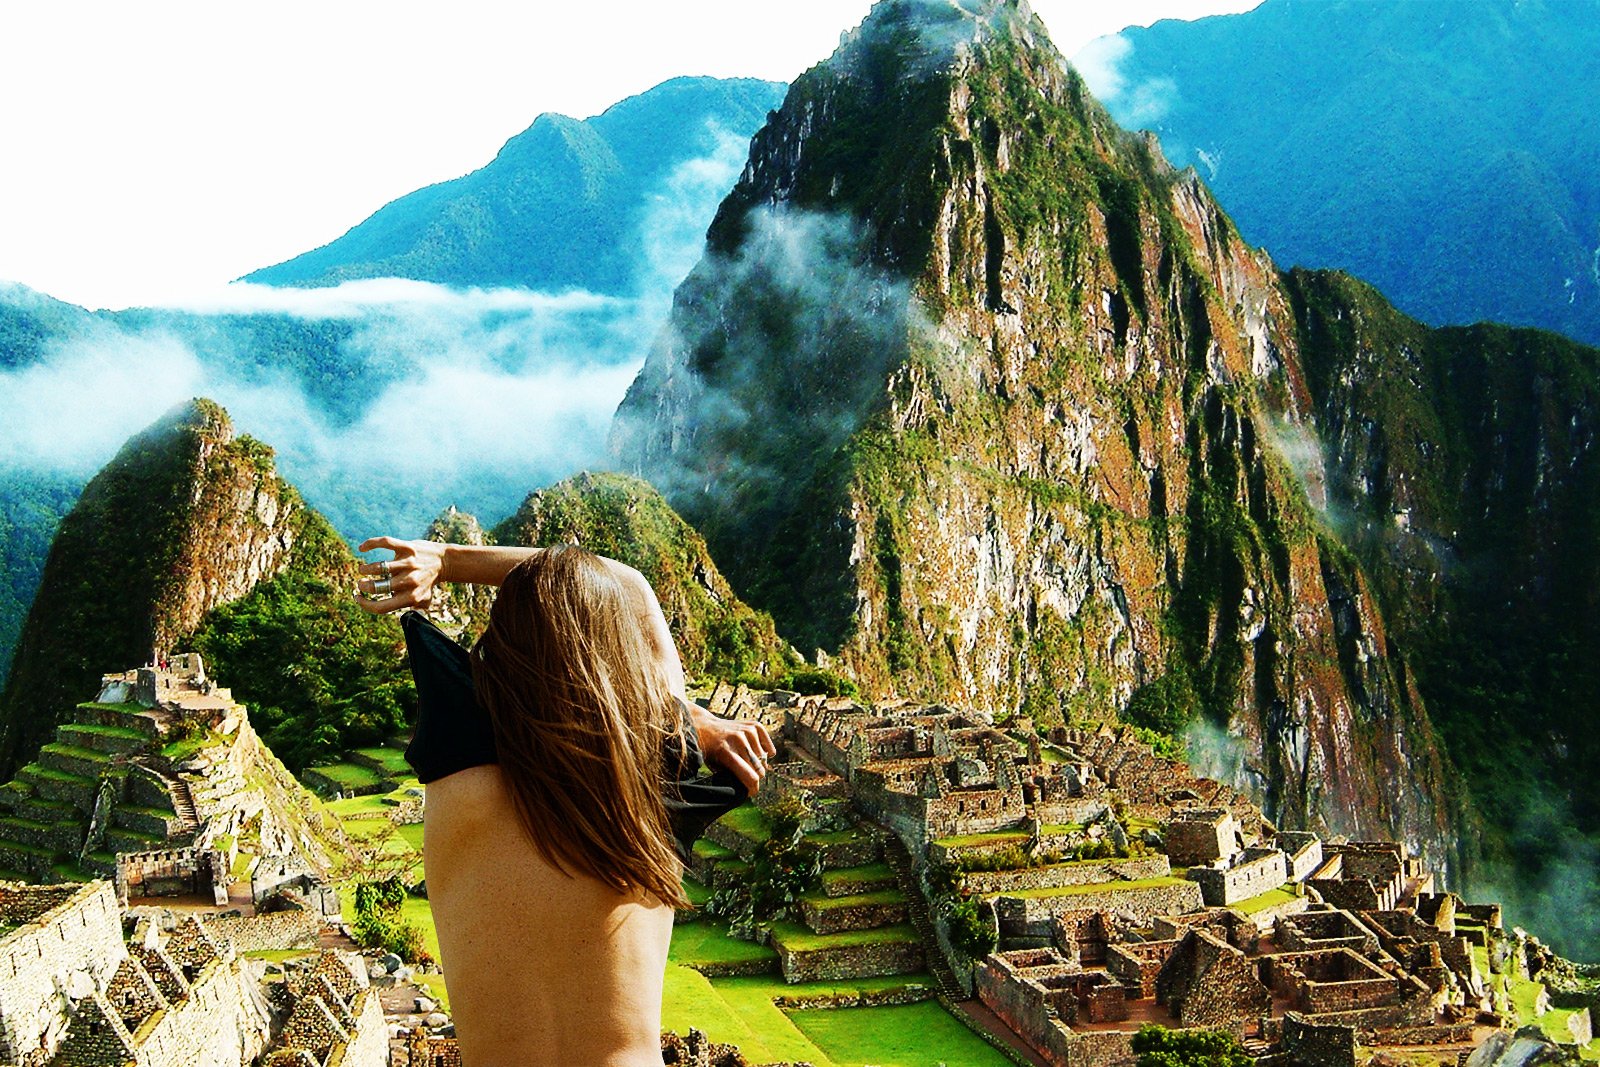 How to take a naked selfie on the background of Machu Picchu in Aguas Calientes